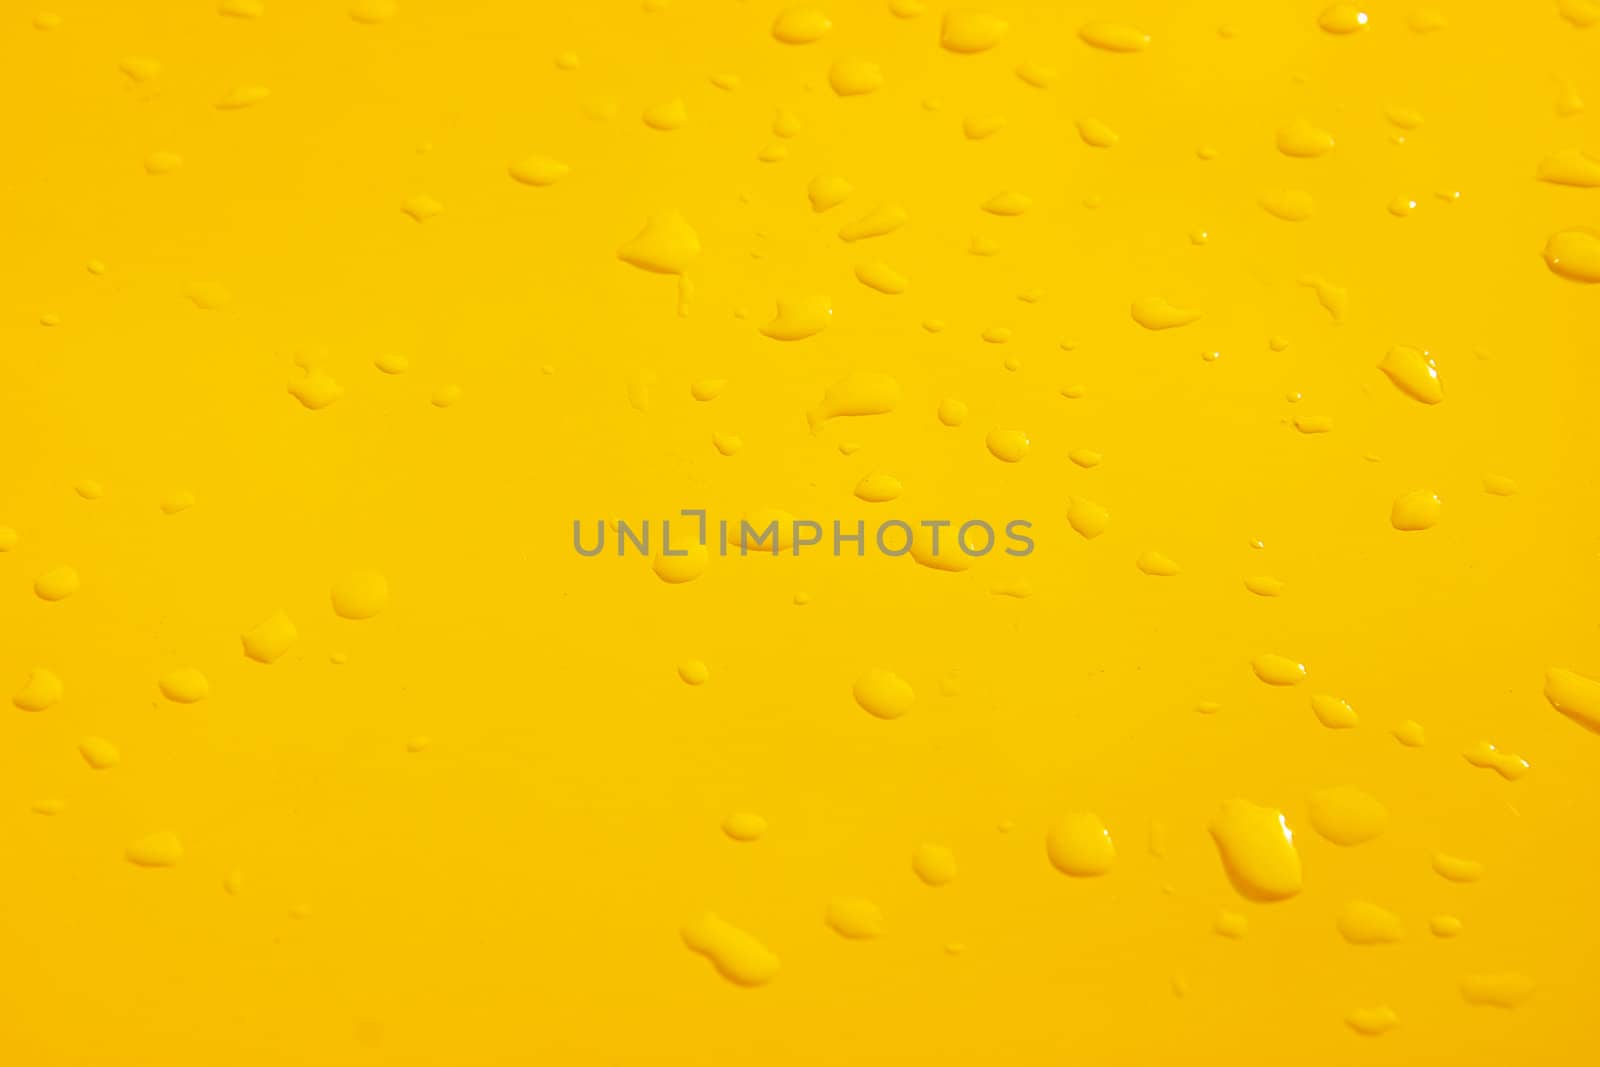 raindrops on the surface painted in yellow metal